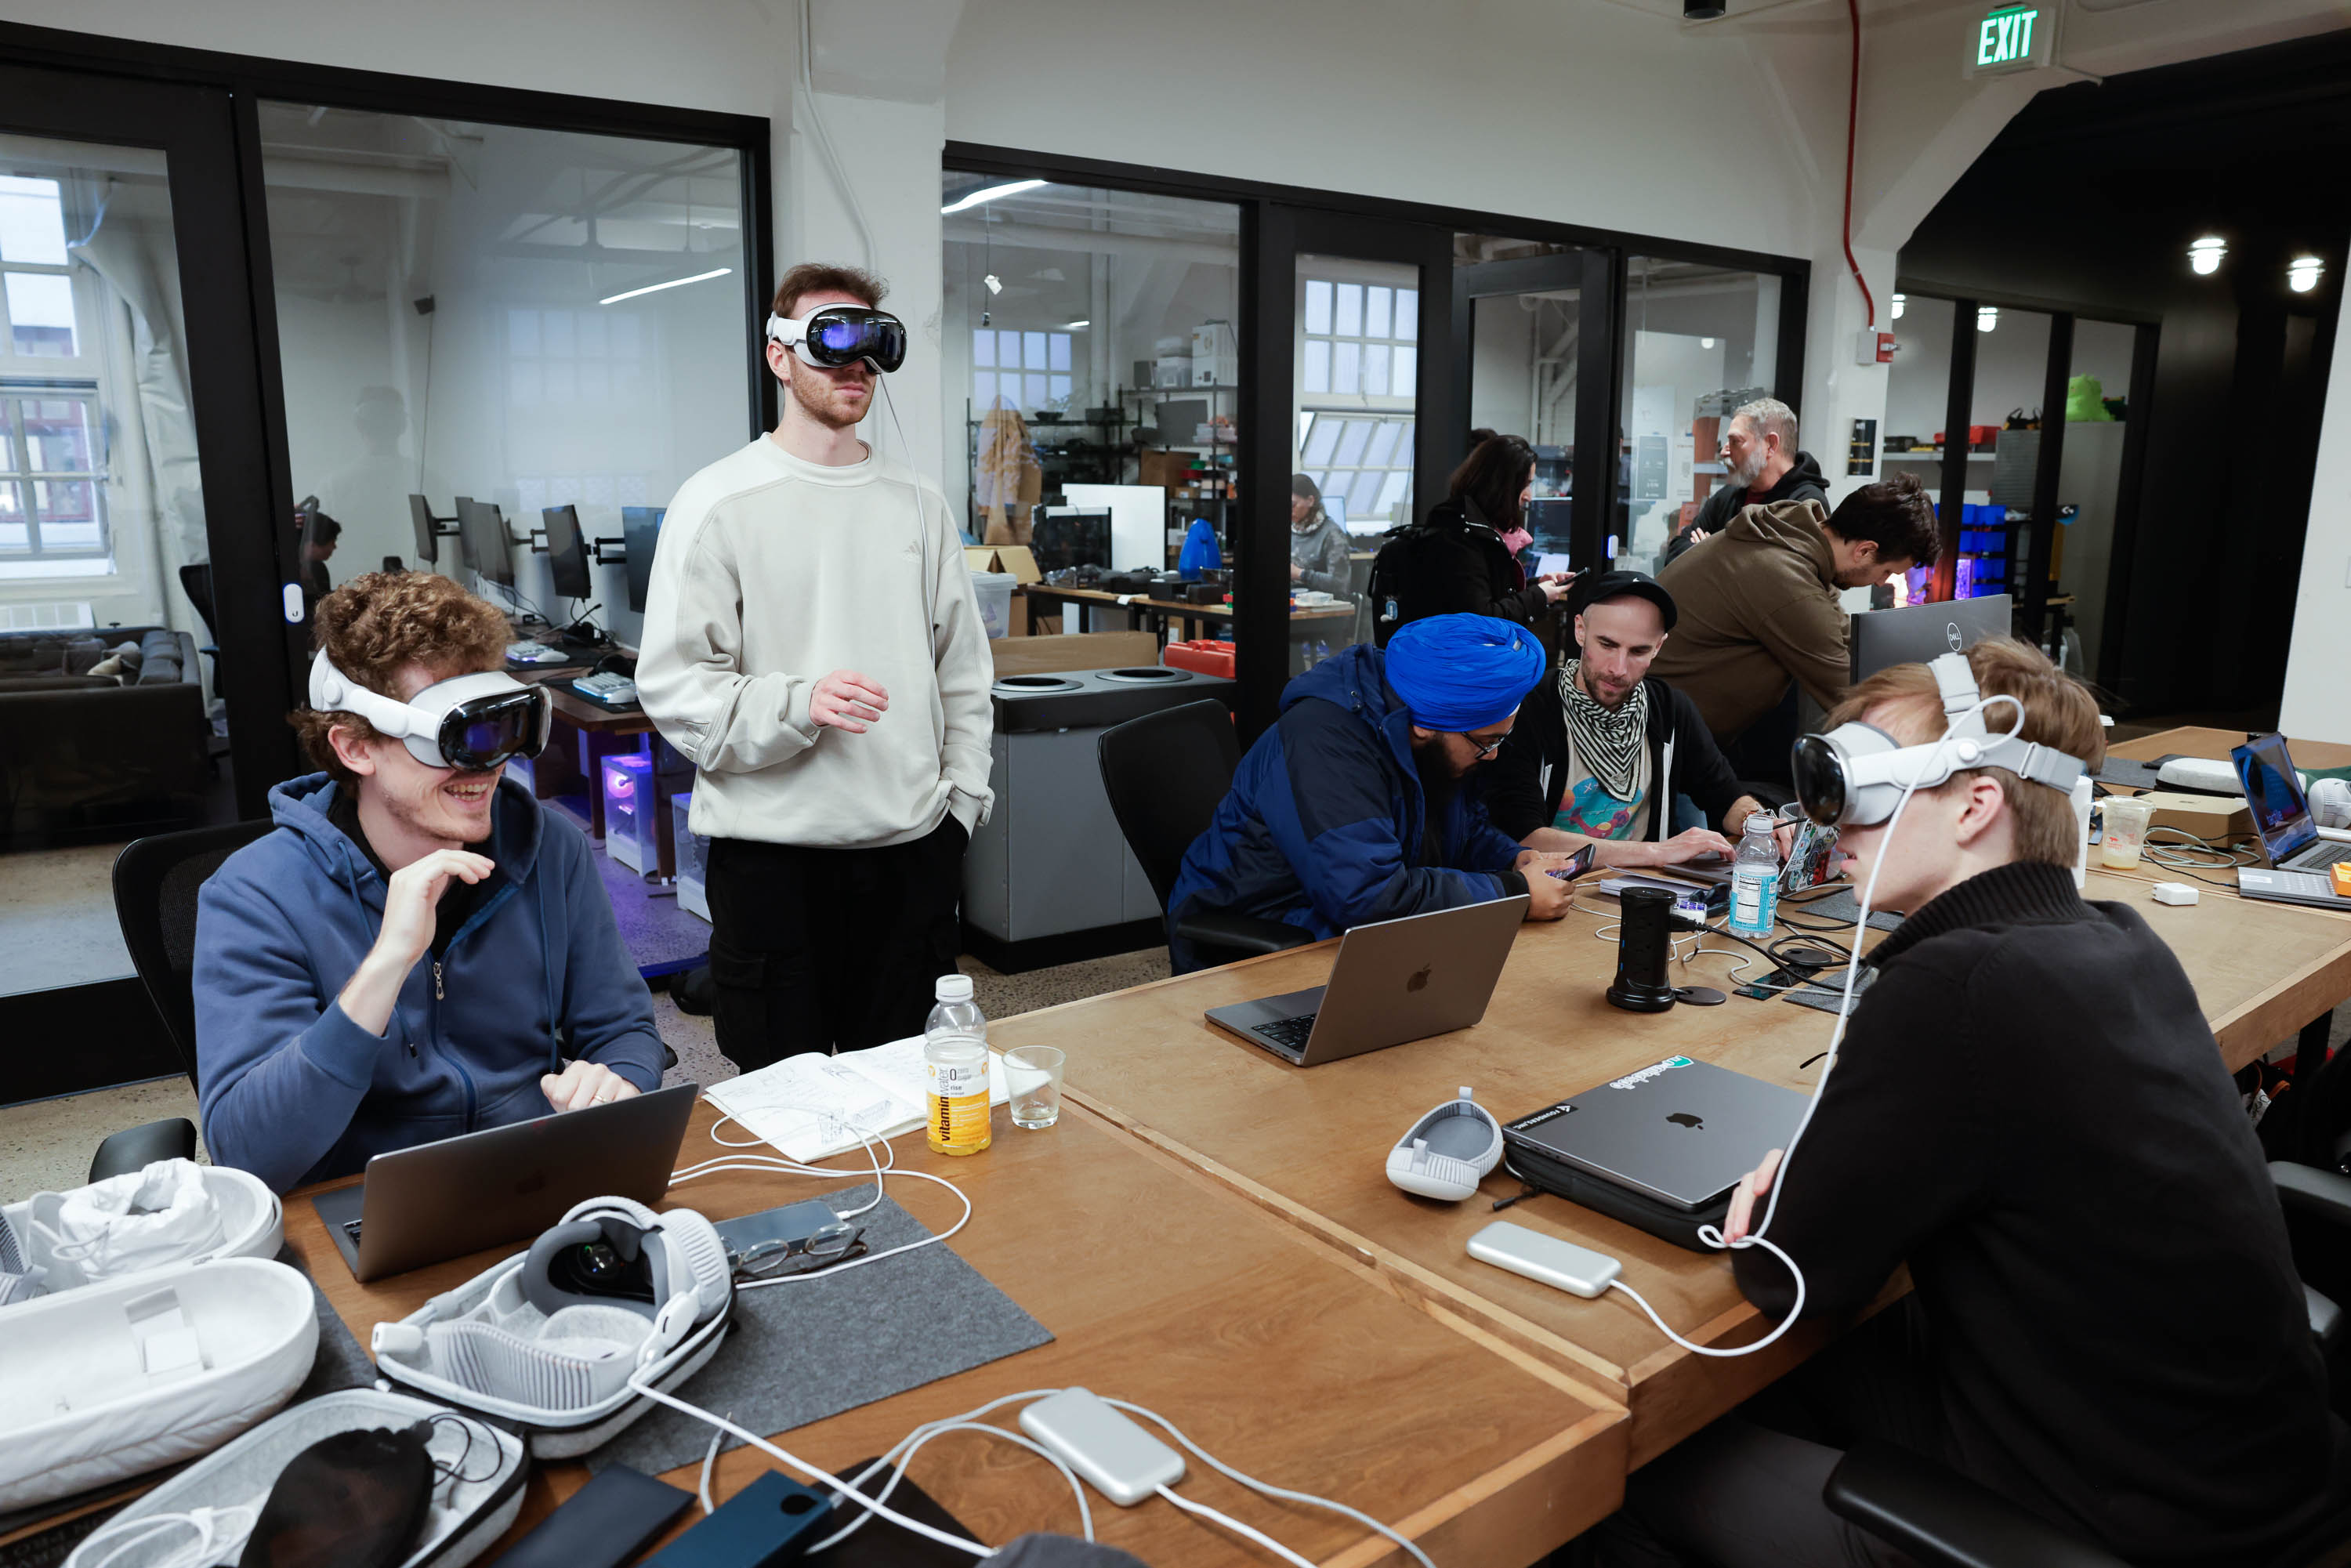 People work in a collaborative tech workspace and use Apple Vision Pro headsets and computers.